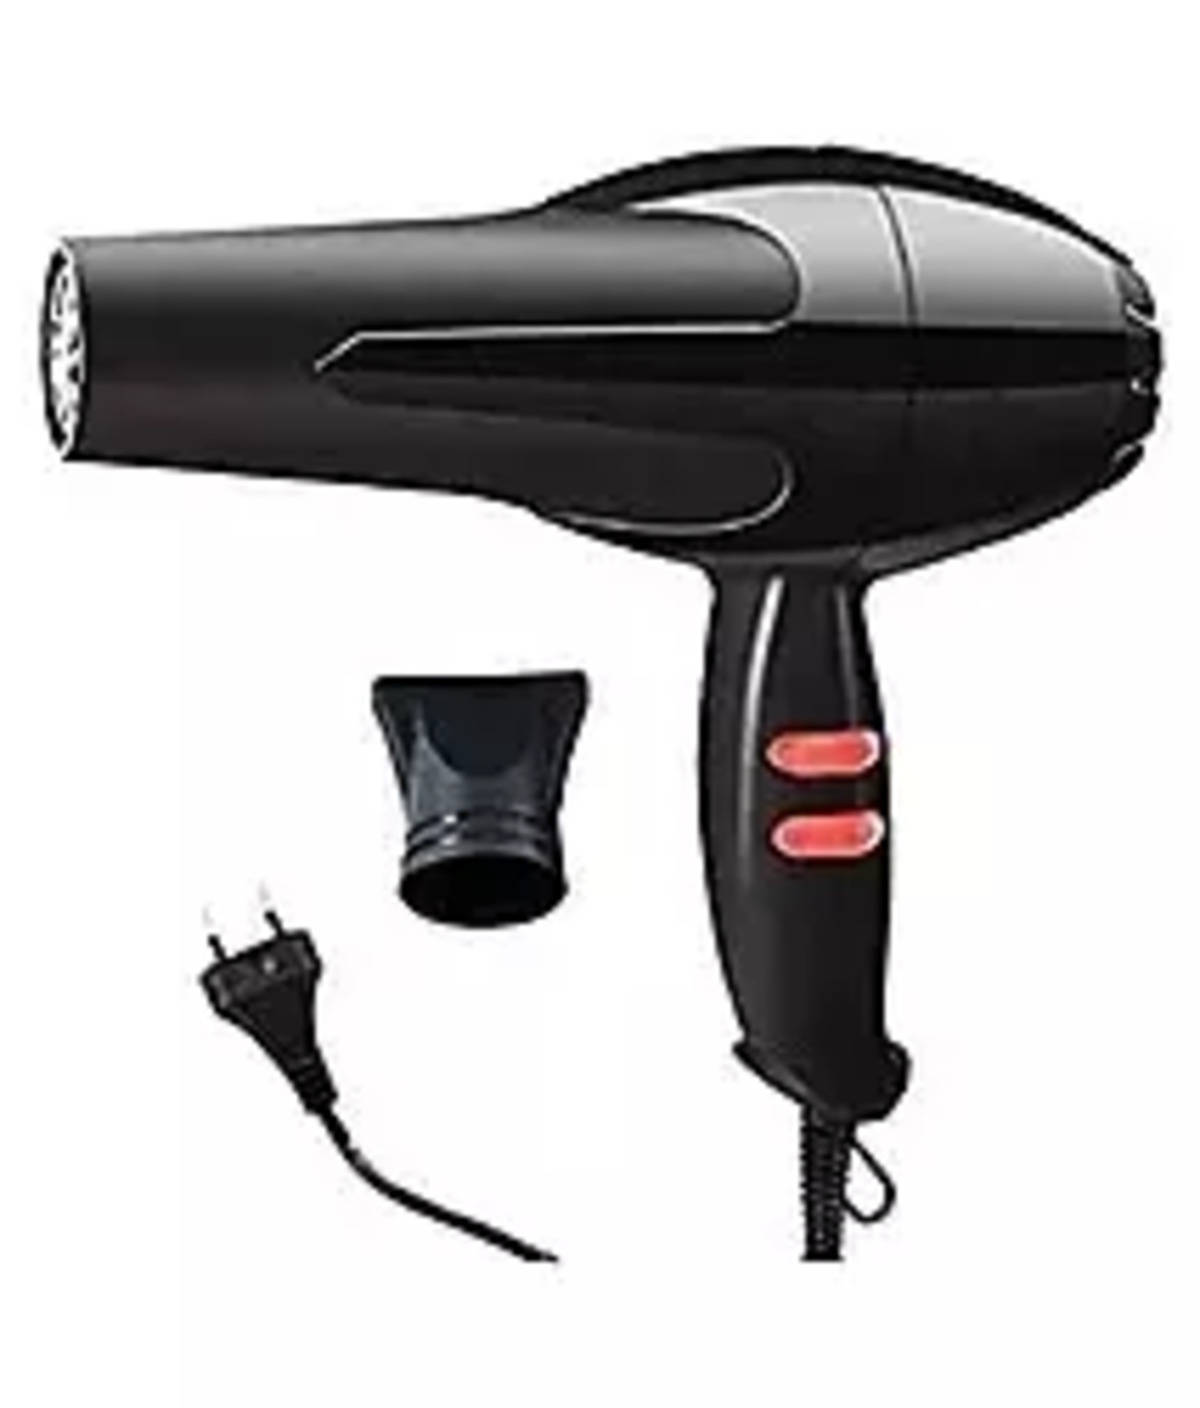 Flying india Salon Style Hair Dryer Hair Dryer (Black) Price in India,  Specifications and Review